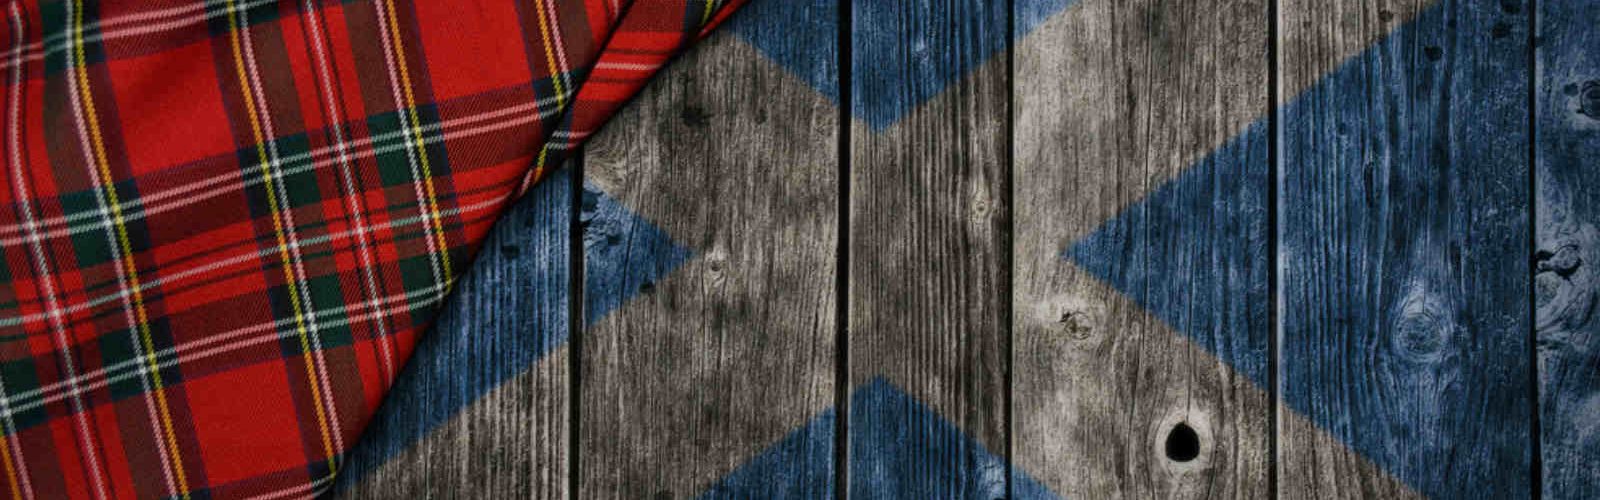 Scottish flag painted on wood and tartan cloth in the corner